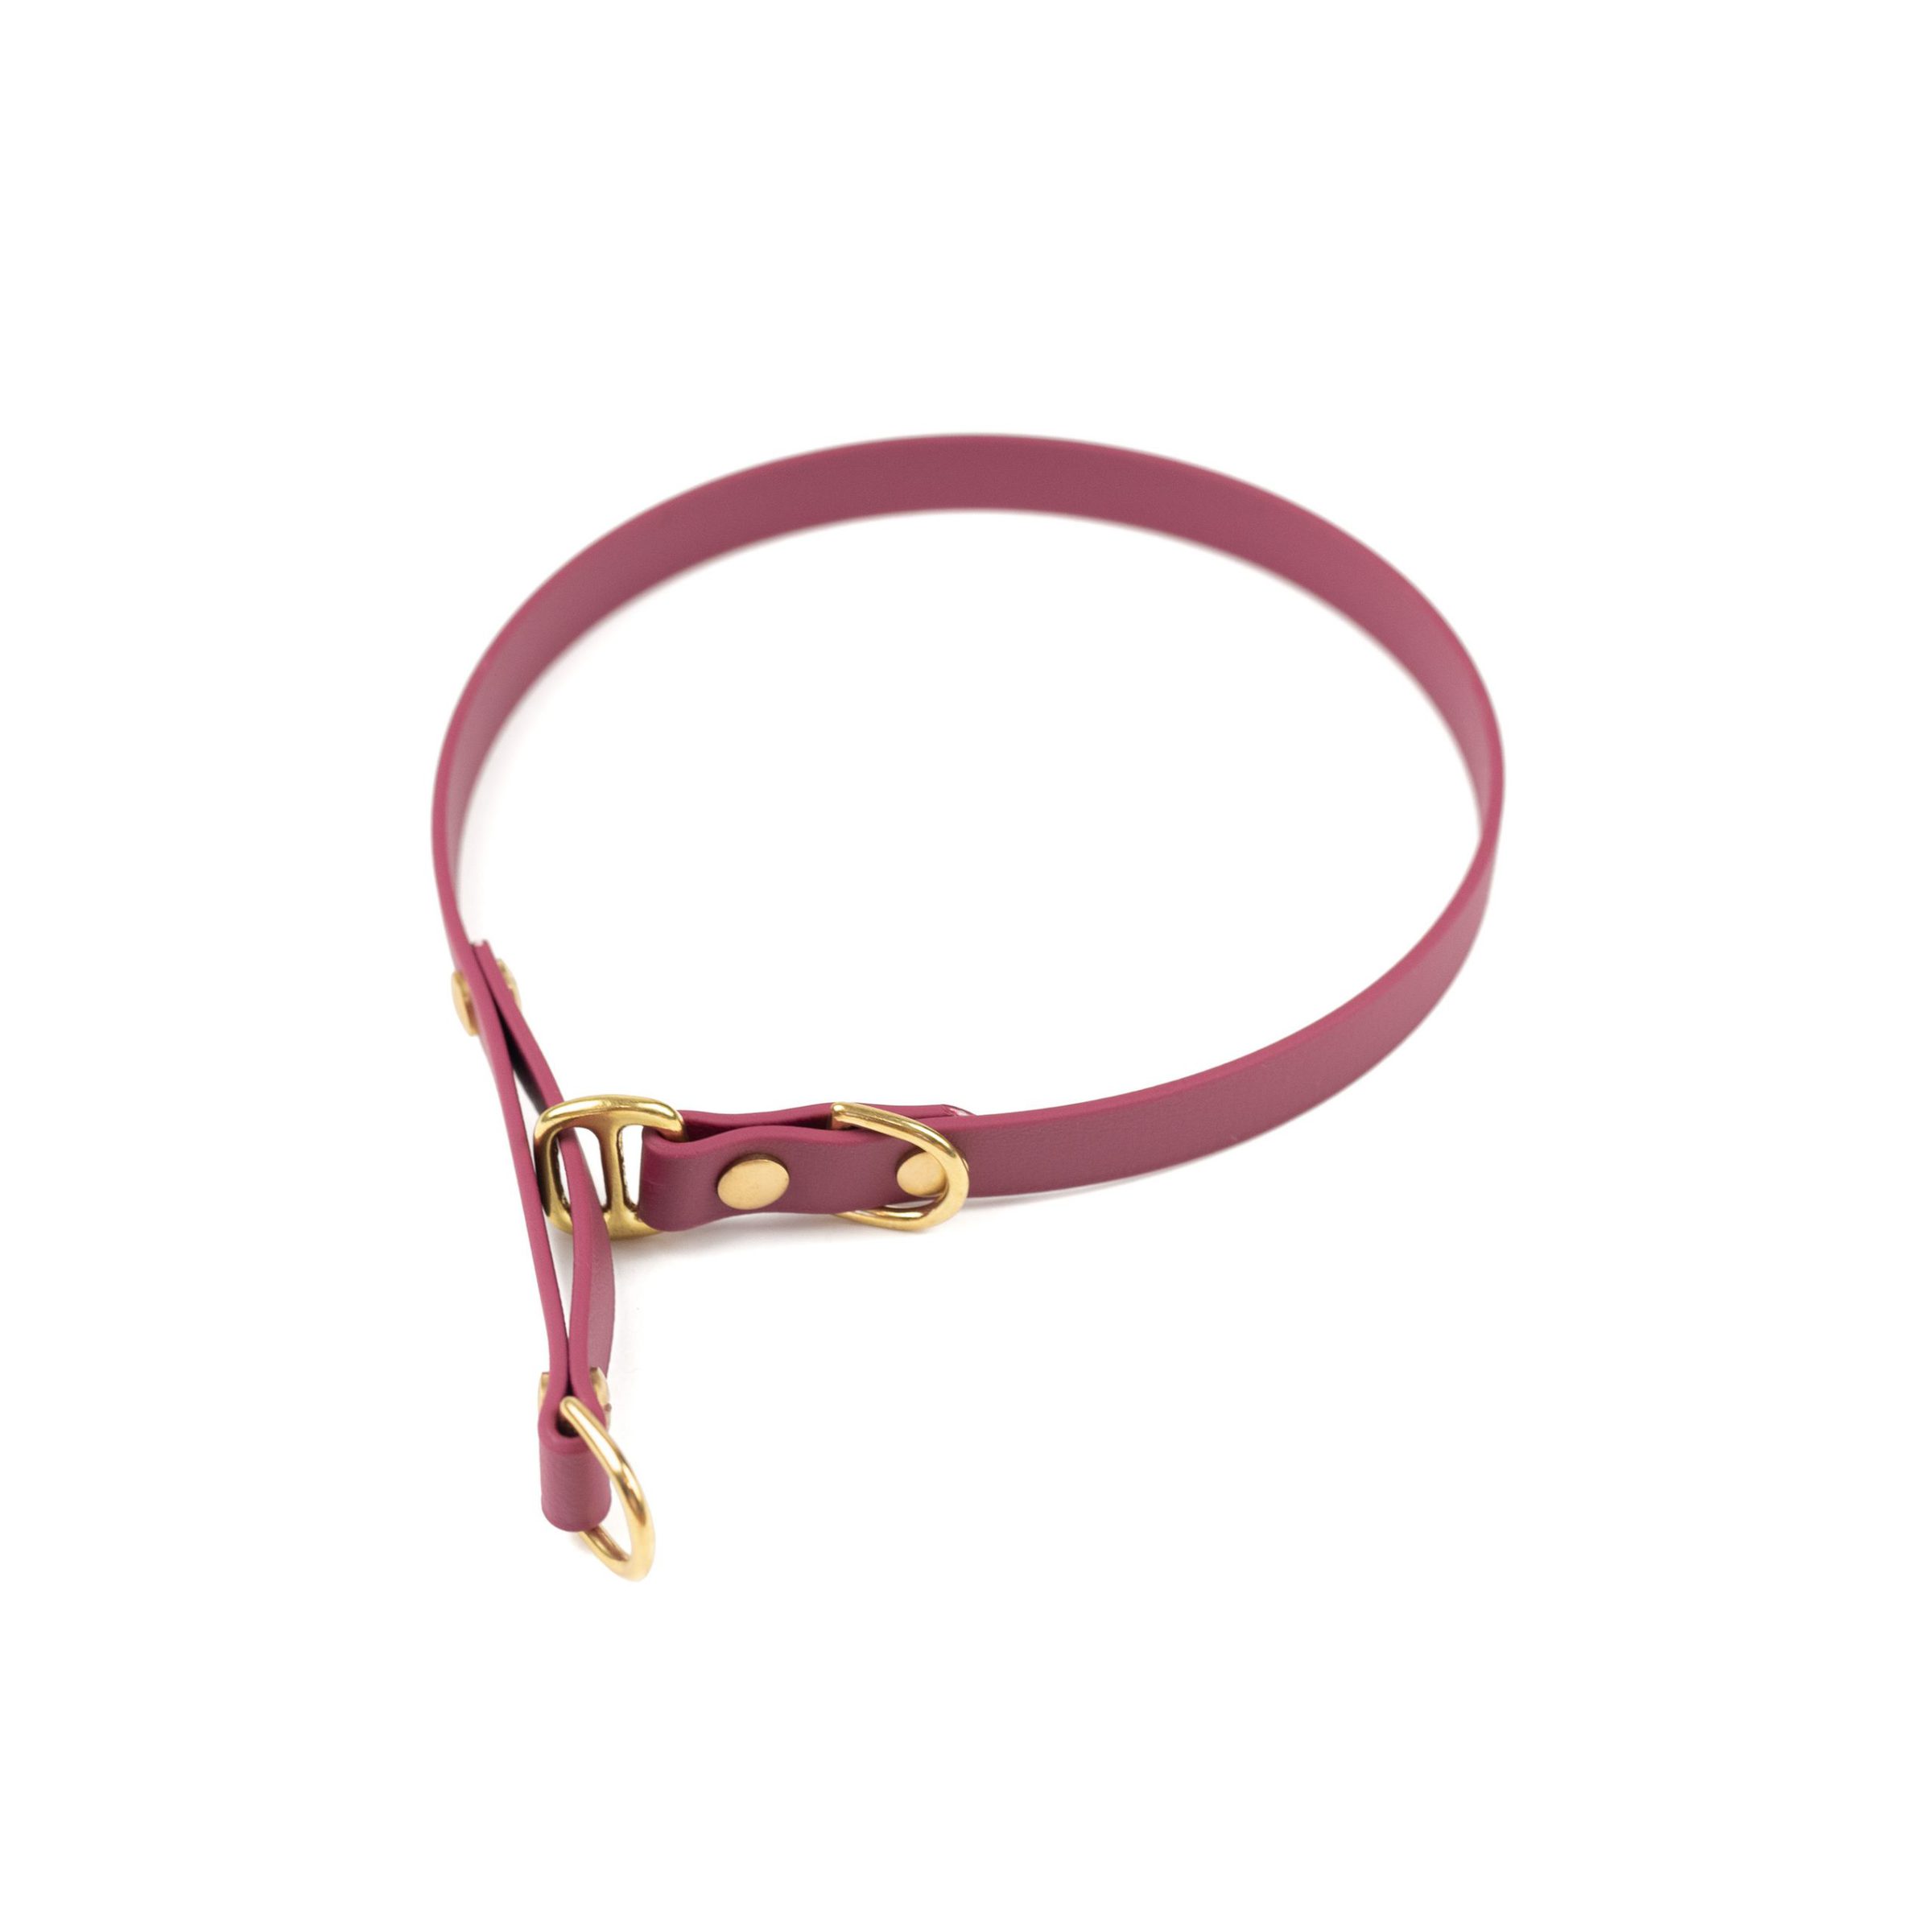 burgundy 5/8" classic limited slip collar in solid brass